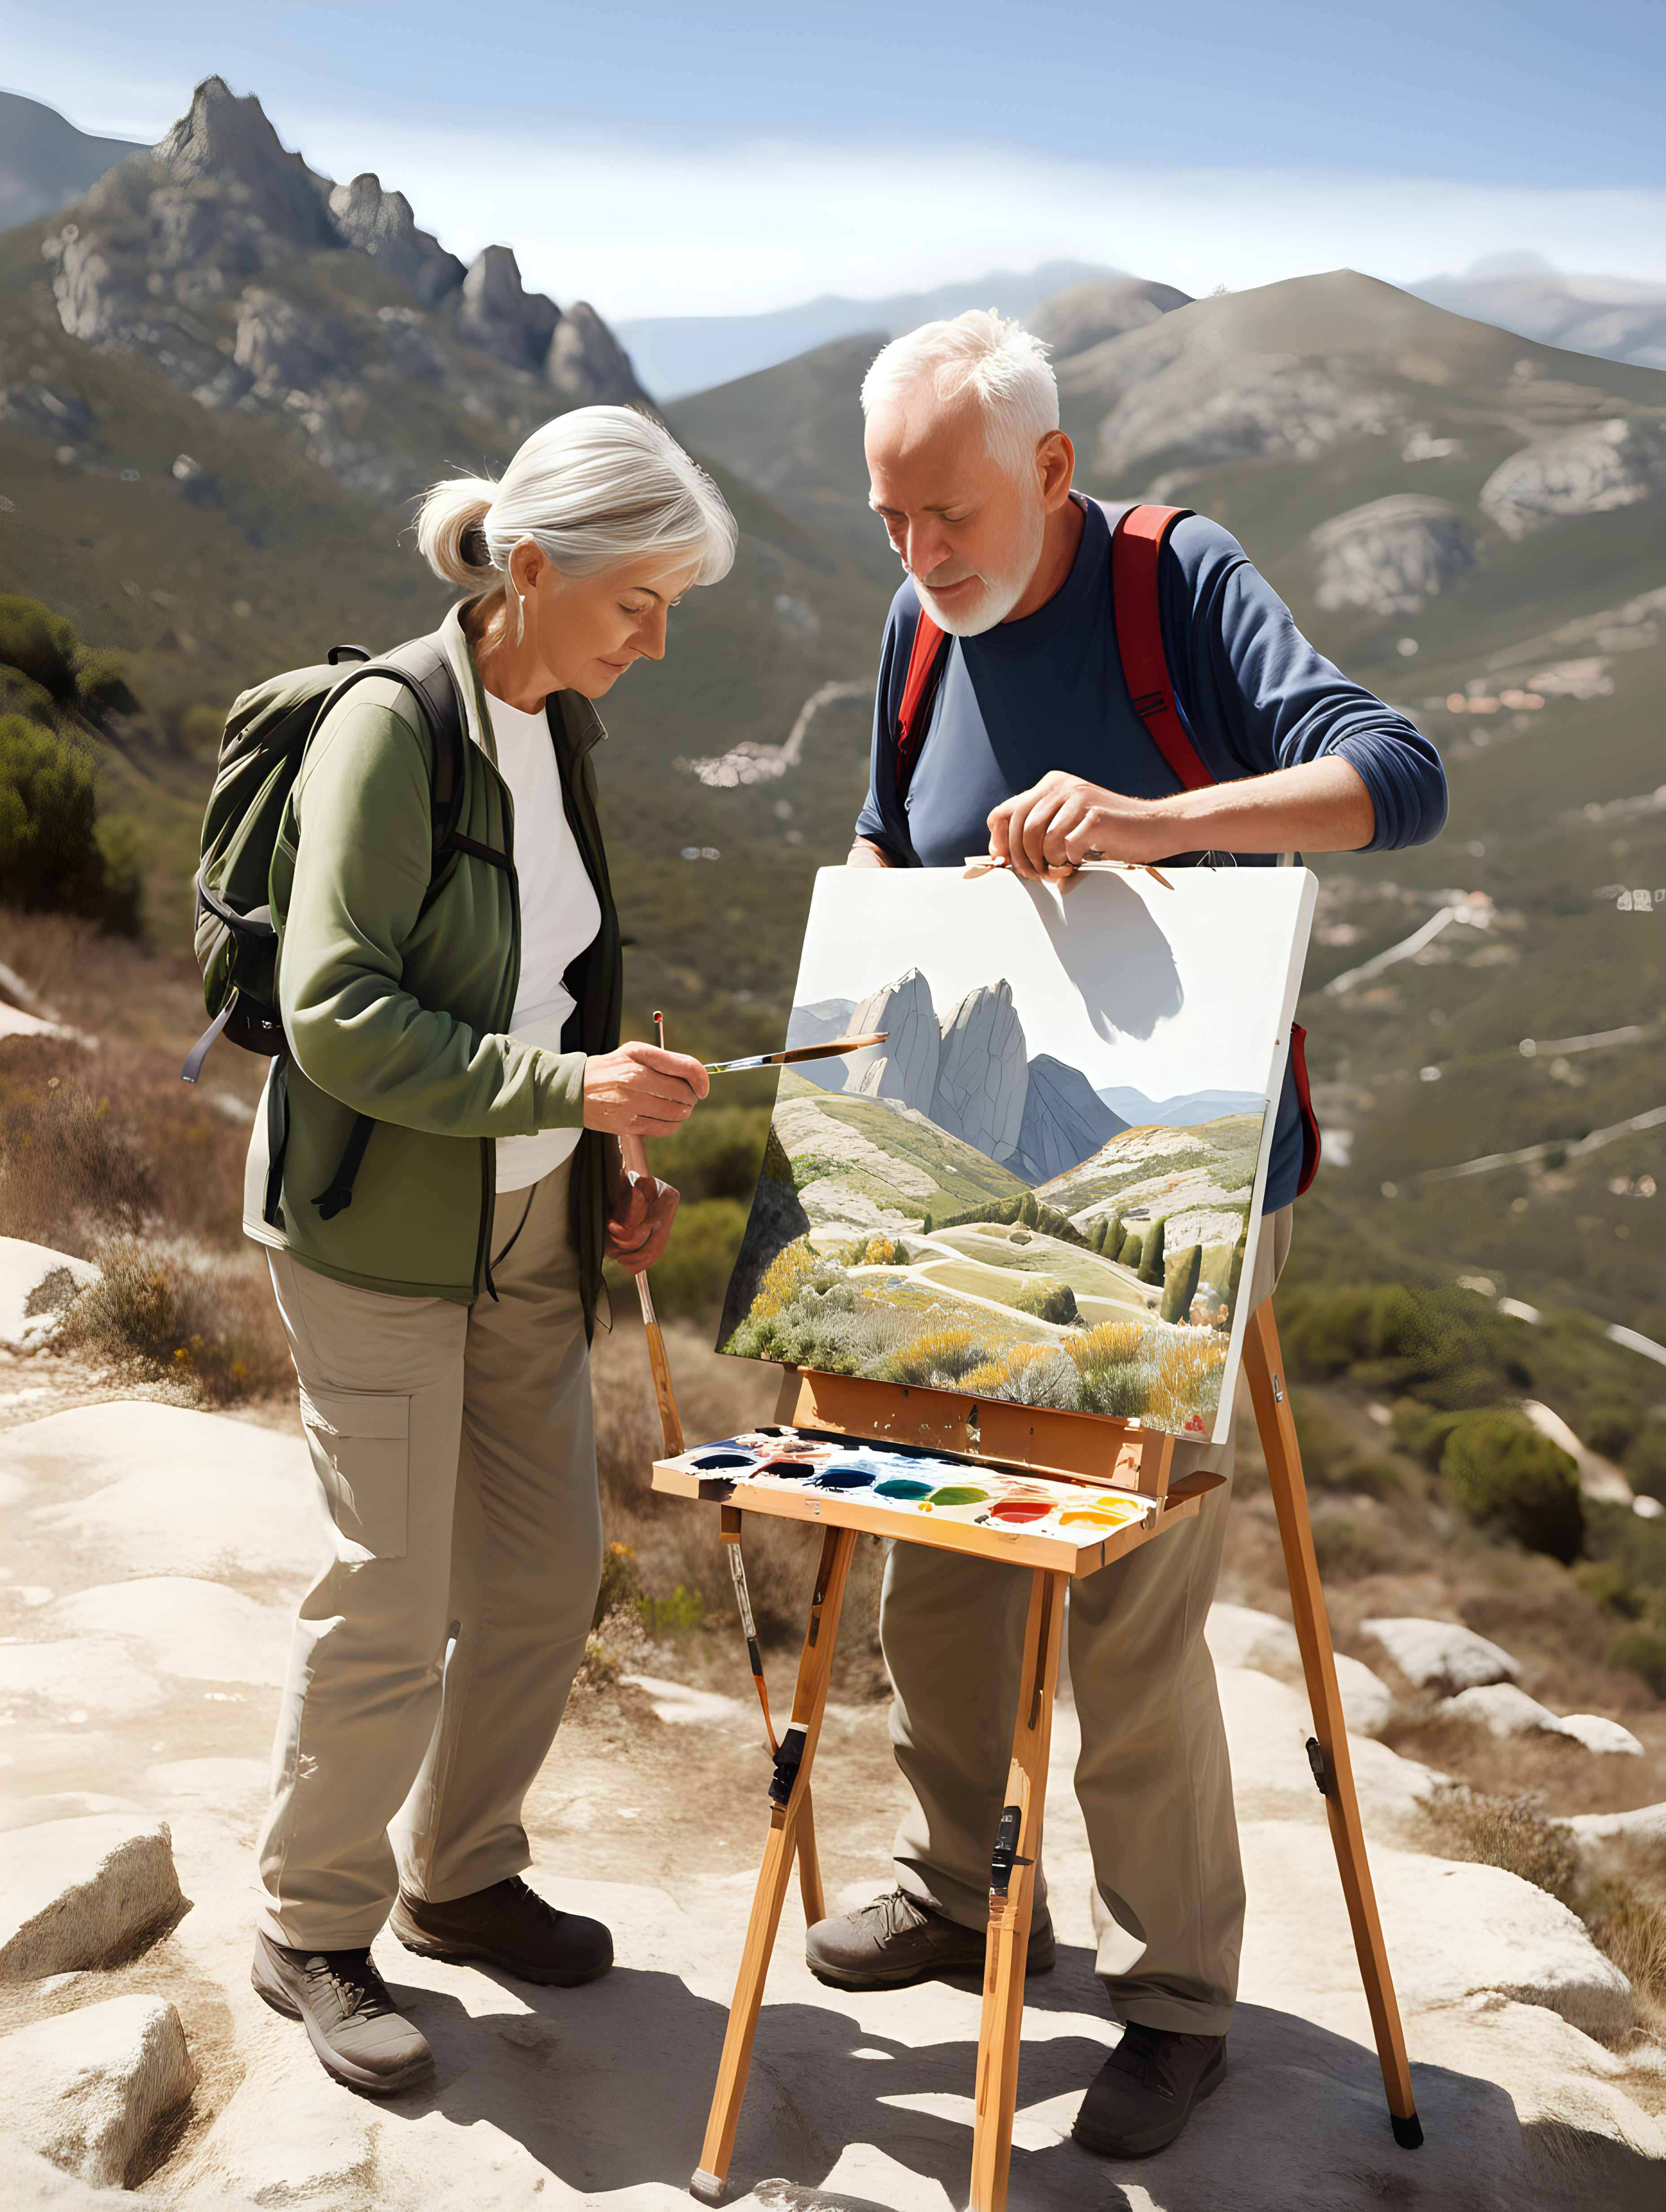 An older couple, in their mid sixties, out on a hike in the Spanish mountains. They are doing a canvas painting of location, on wooden easel. A couple of paintbrushes and paint bottles on the ground beside them. The couple are wearing hiking clothing